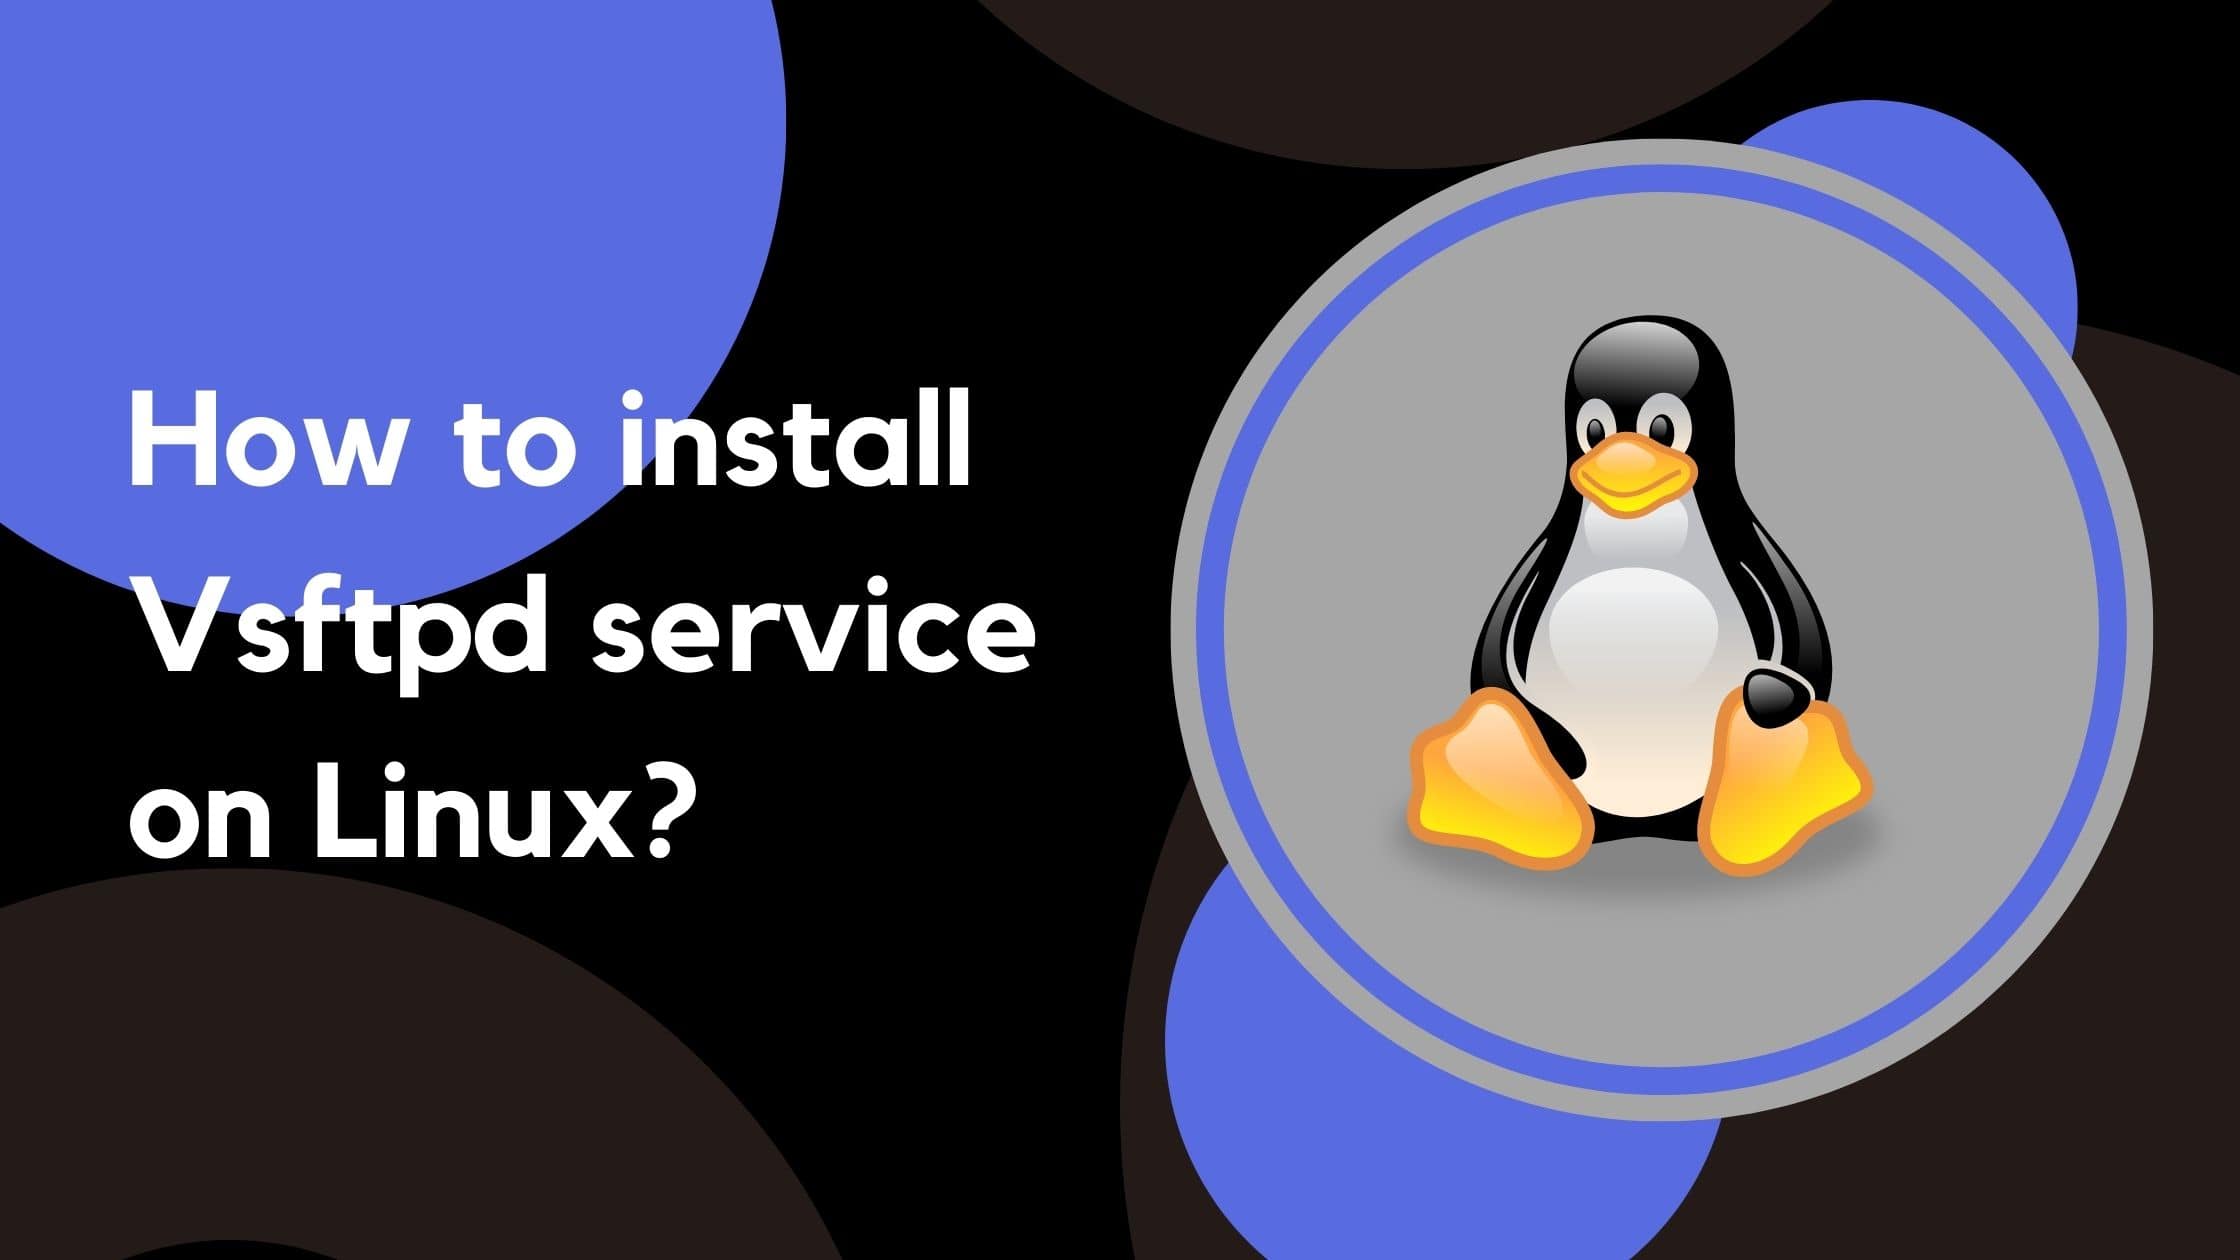 How To Install Vsftpd Service On Linux?